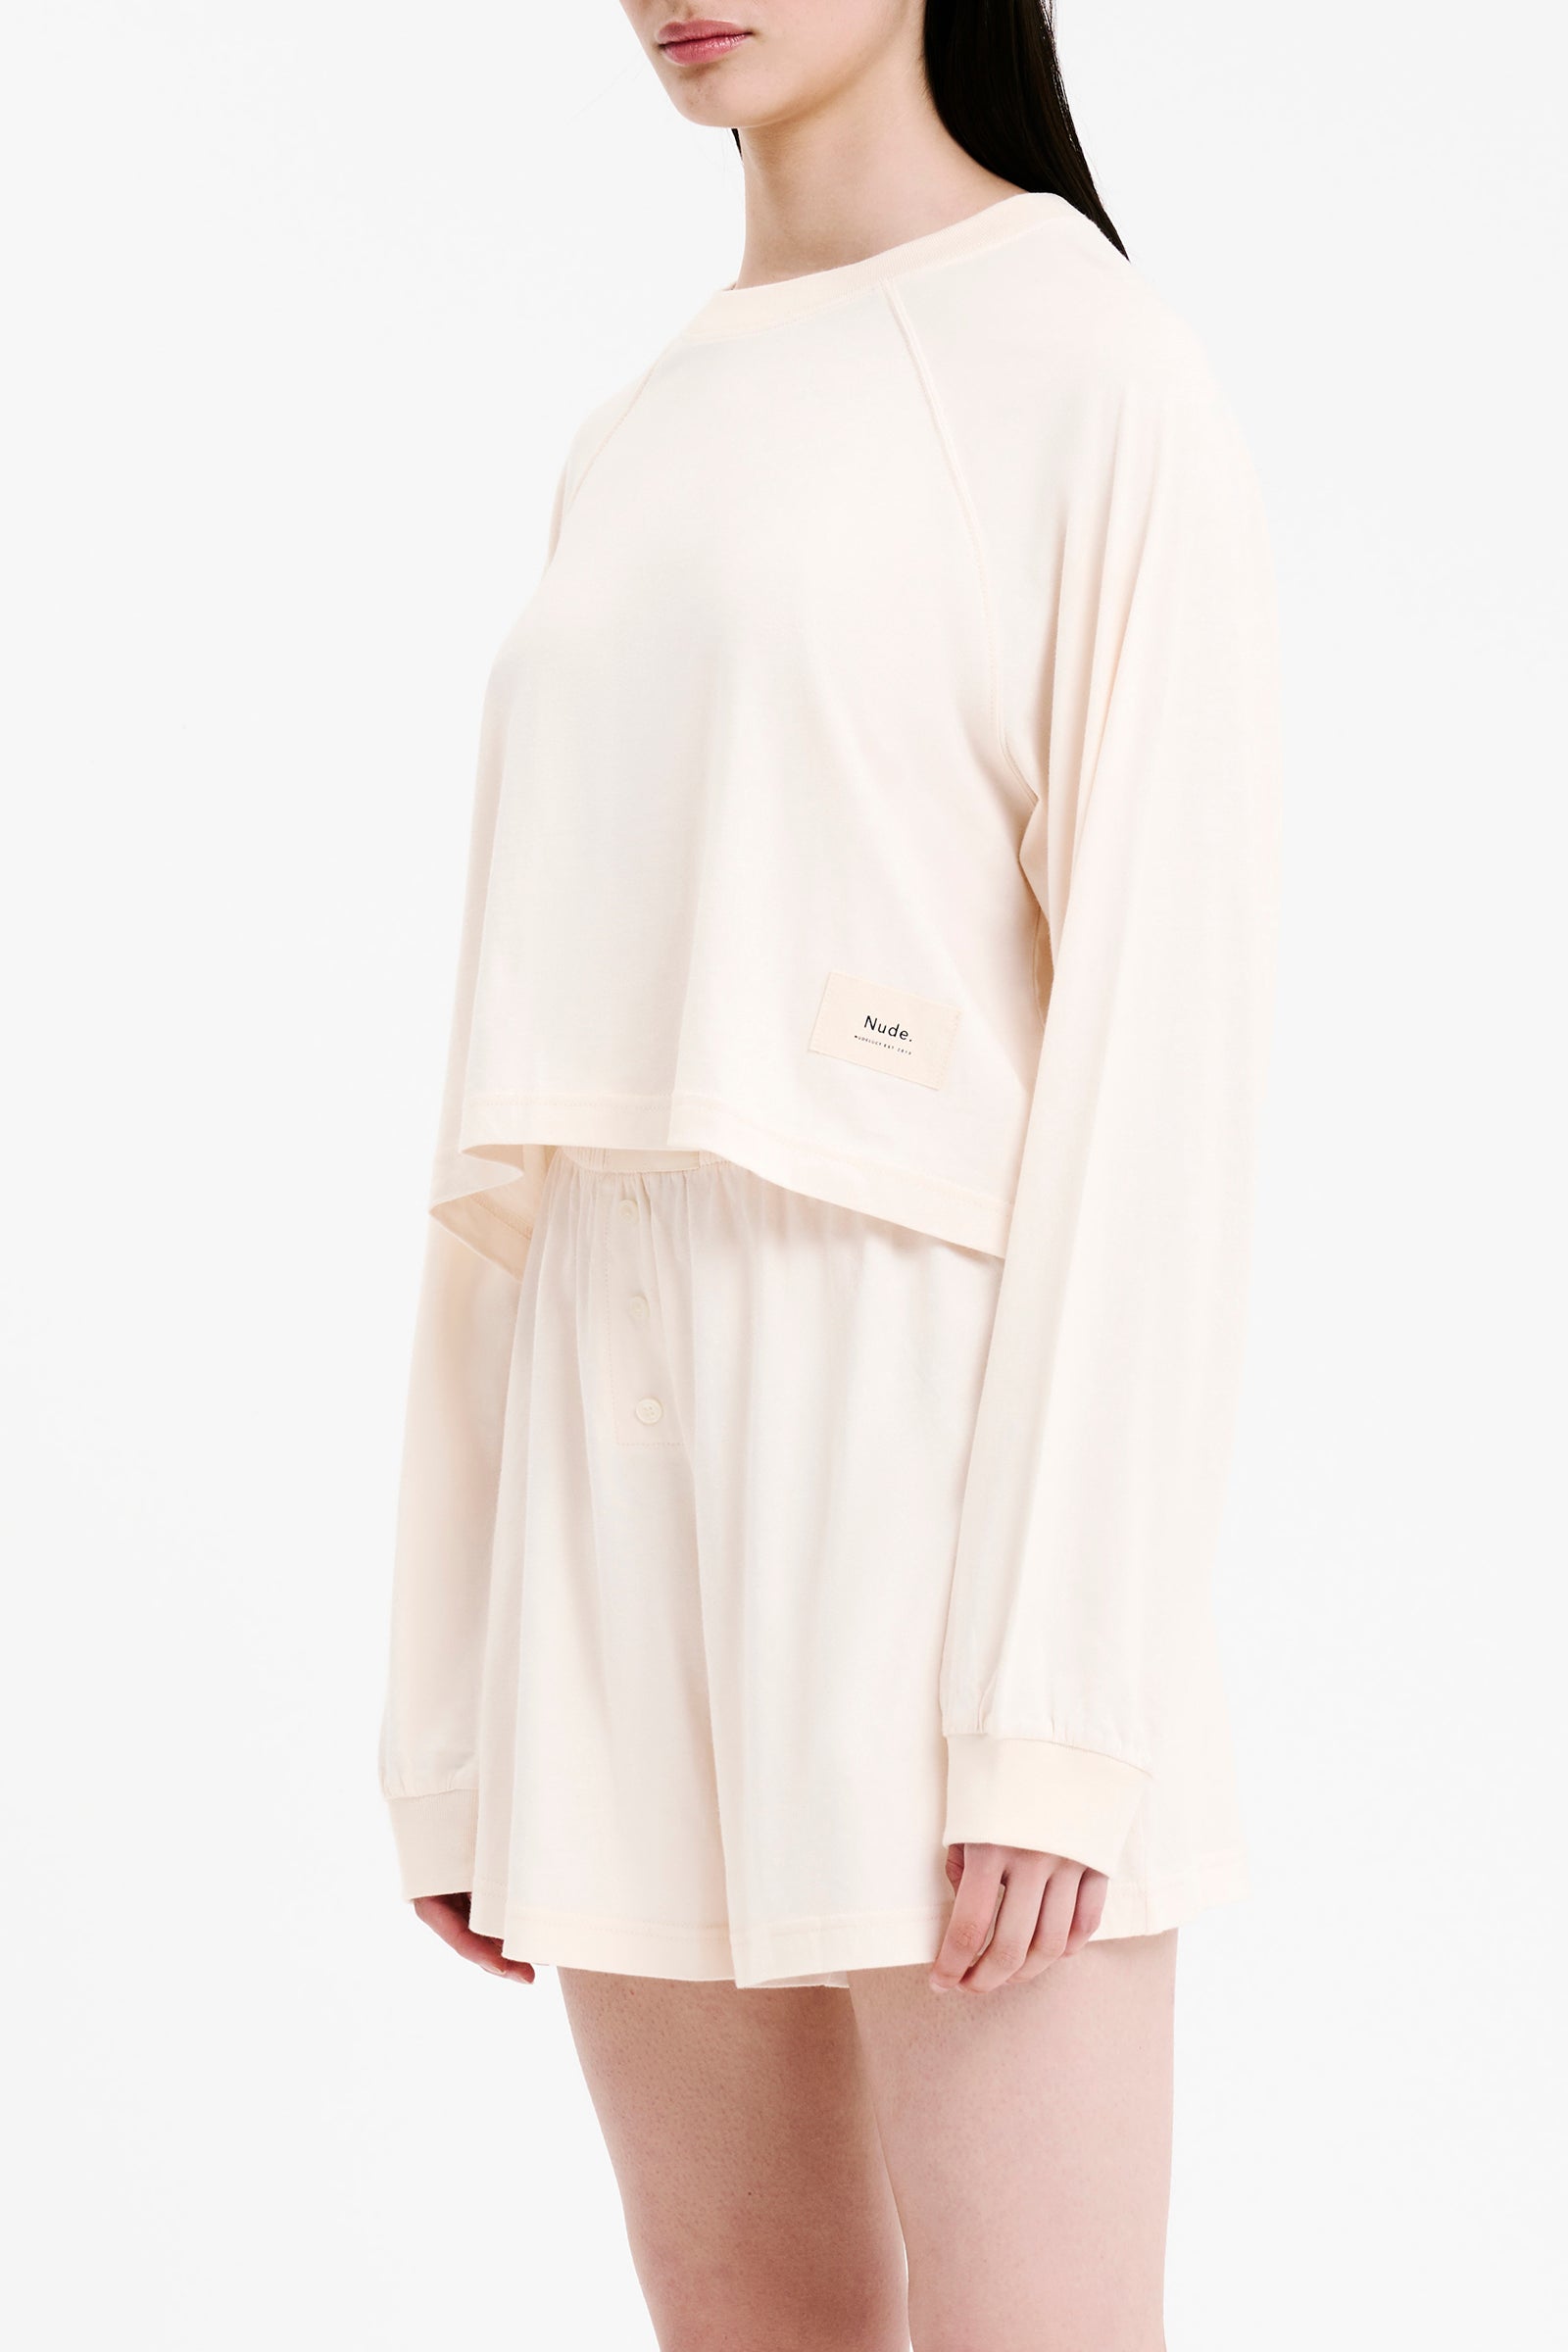 Nude Lucy Lounge Jersey L S Tee in White Cloud